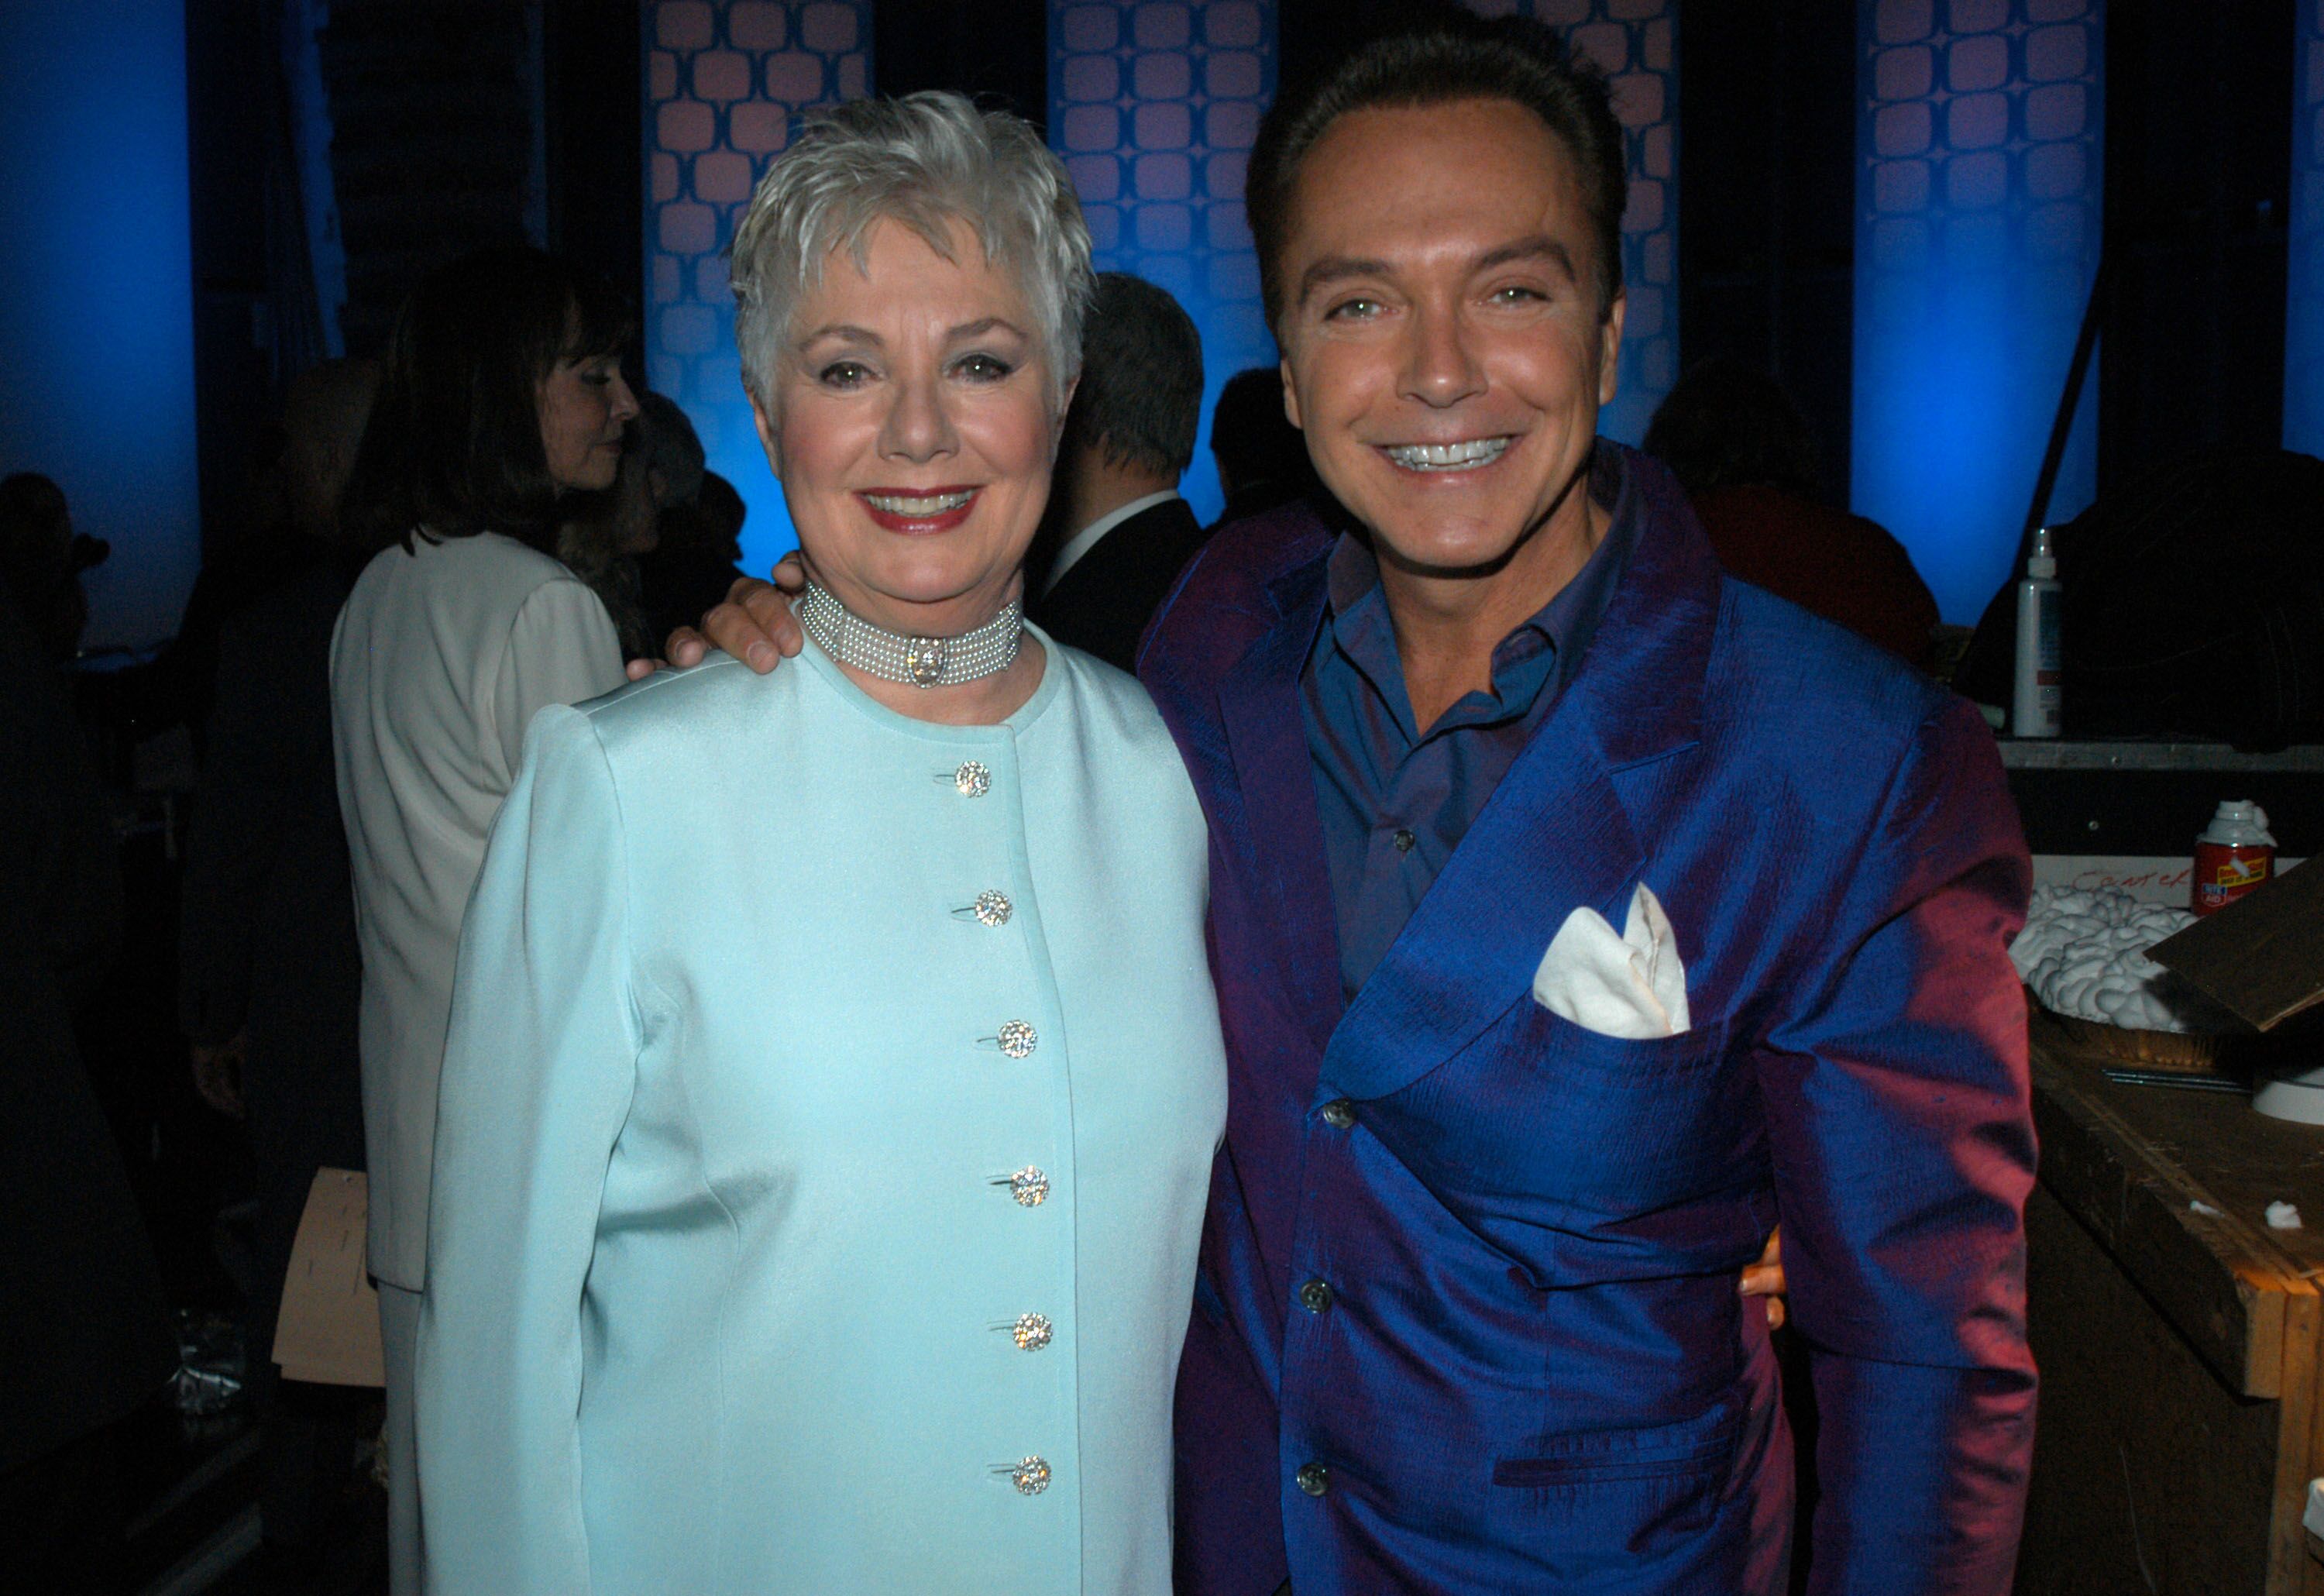 Shirley Jones and David Cassidy during The TV Land Awards at Hollywood Palladium in CA, United States on March 02, 2003. | Photo: Getty Images